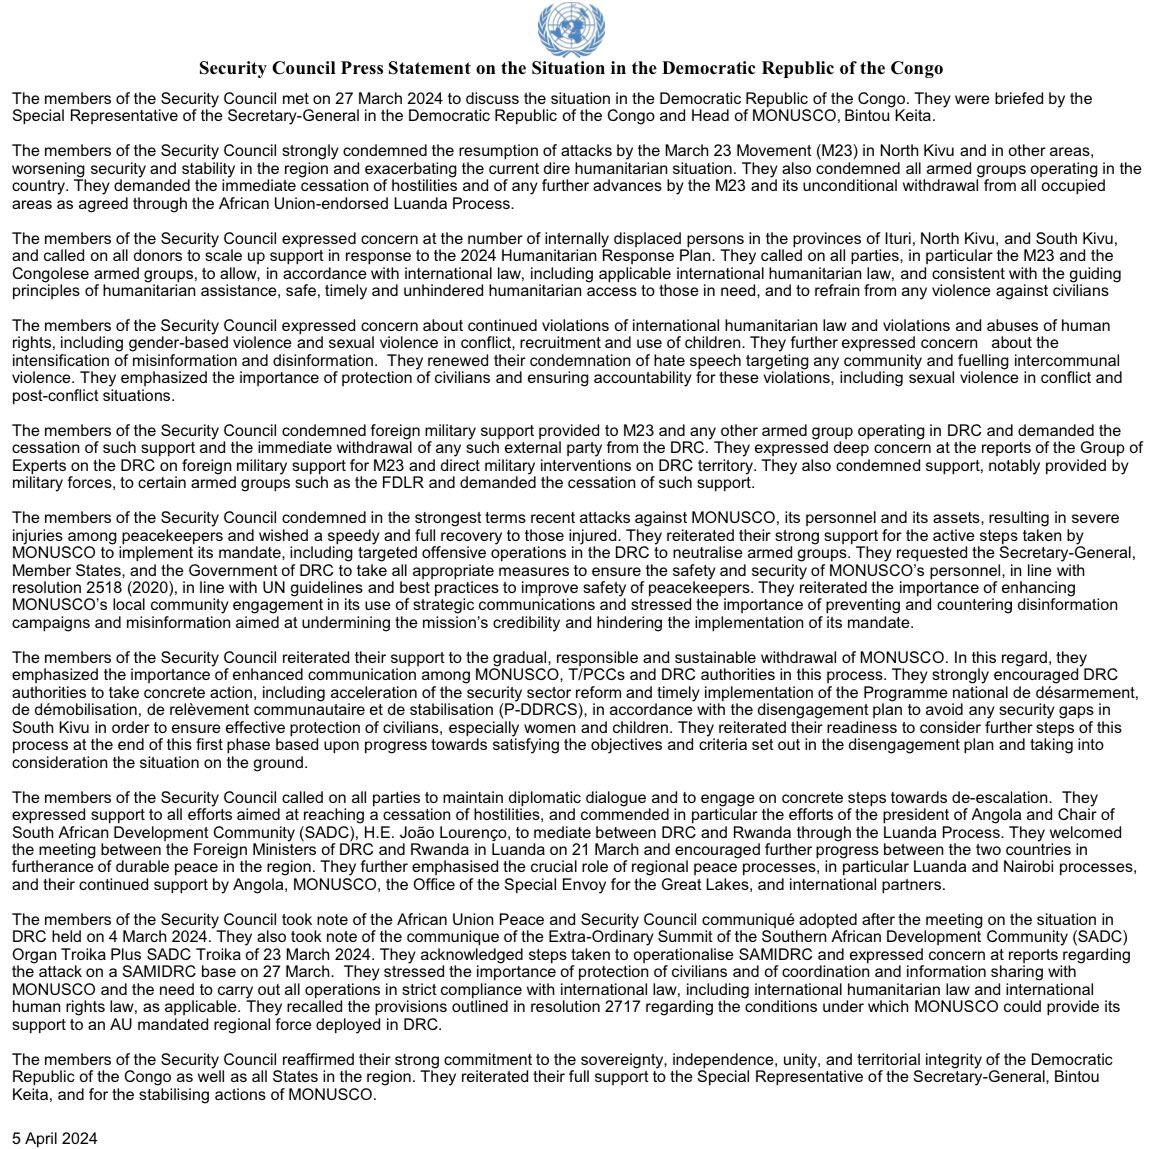 🇺🇳Security Council Press Statement on the Situation in the🇨🇩#DRC #UNSC members condemned the resumption of attacks by the M23 in North Kivu & in other areas & demanded the immediate cessation of hostilities. They also condemned attacks against @MONUSCO. Full statement ⬇️